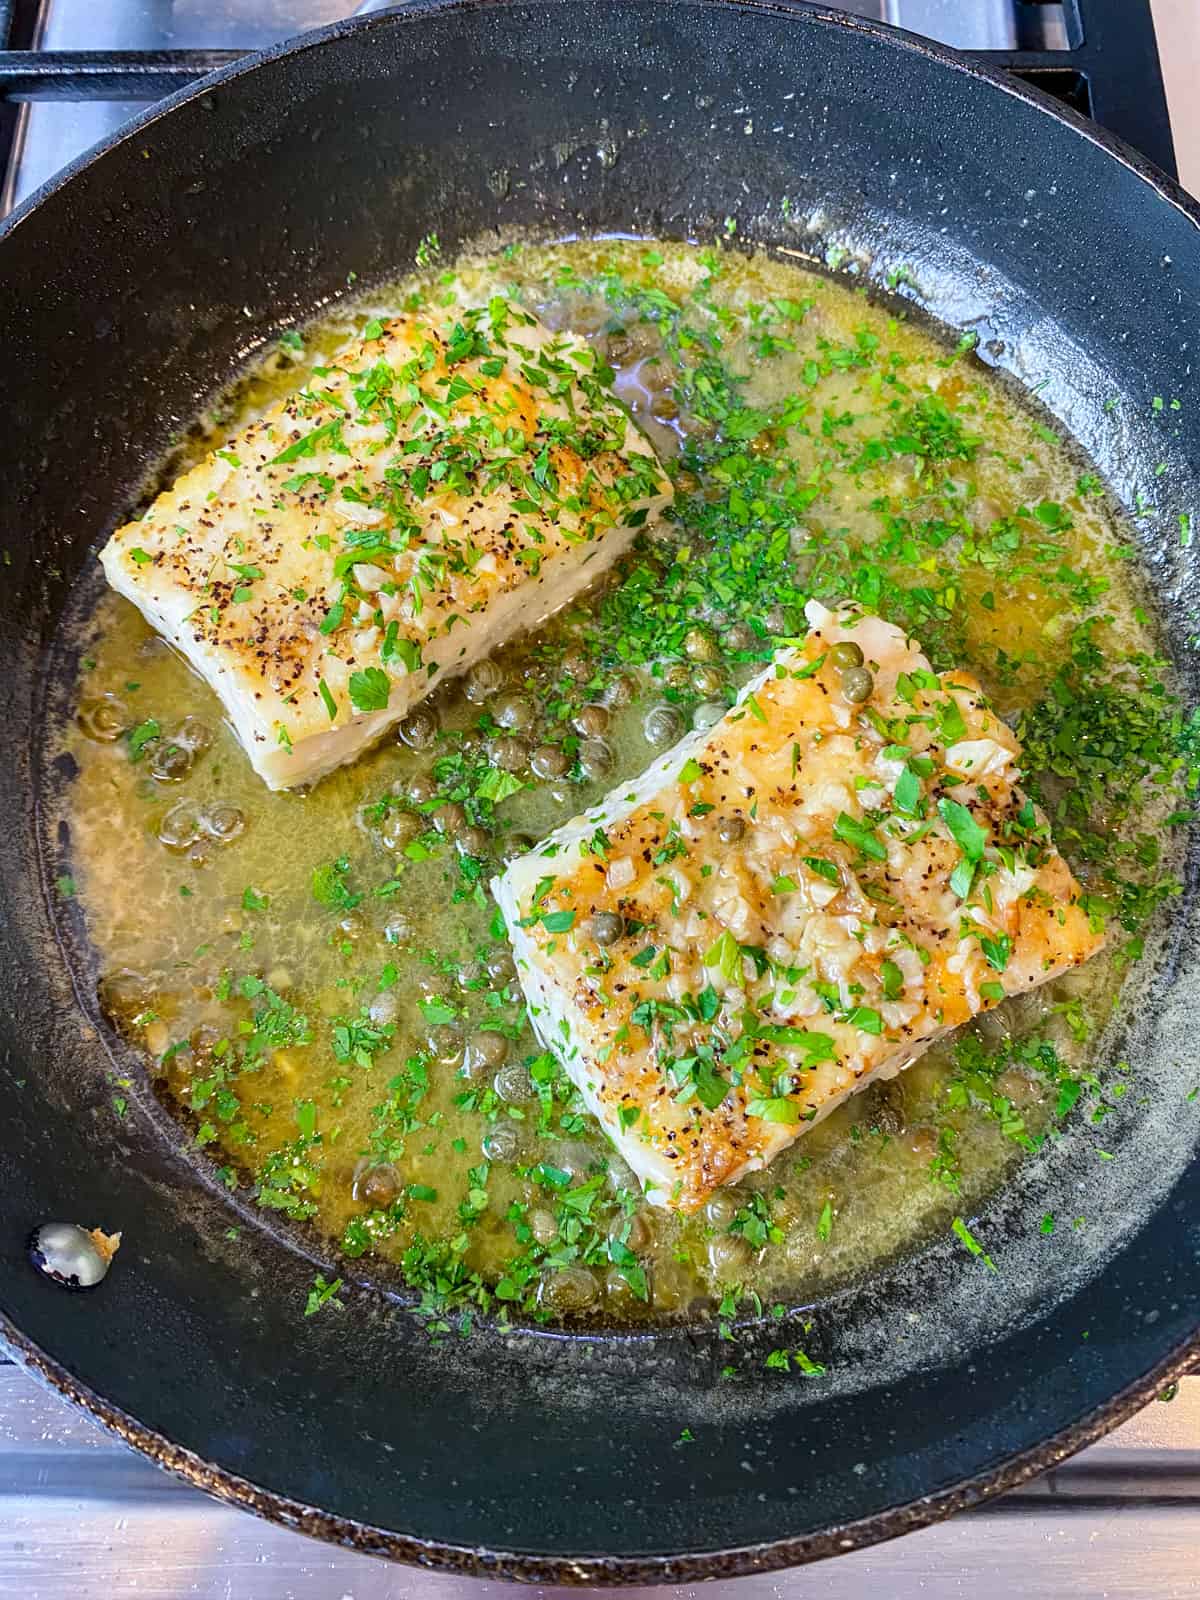 Add capers and chopped parsley to the halibut piccata.